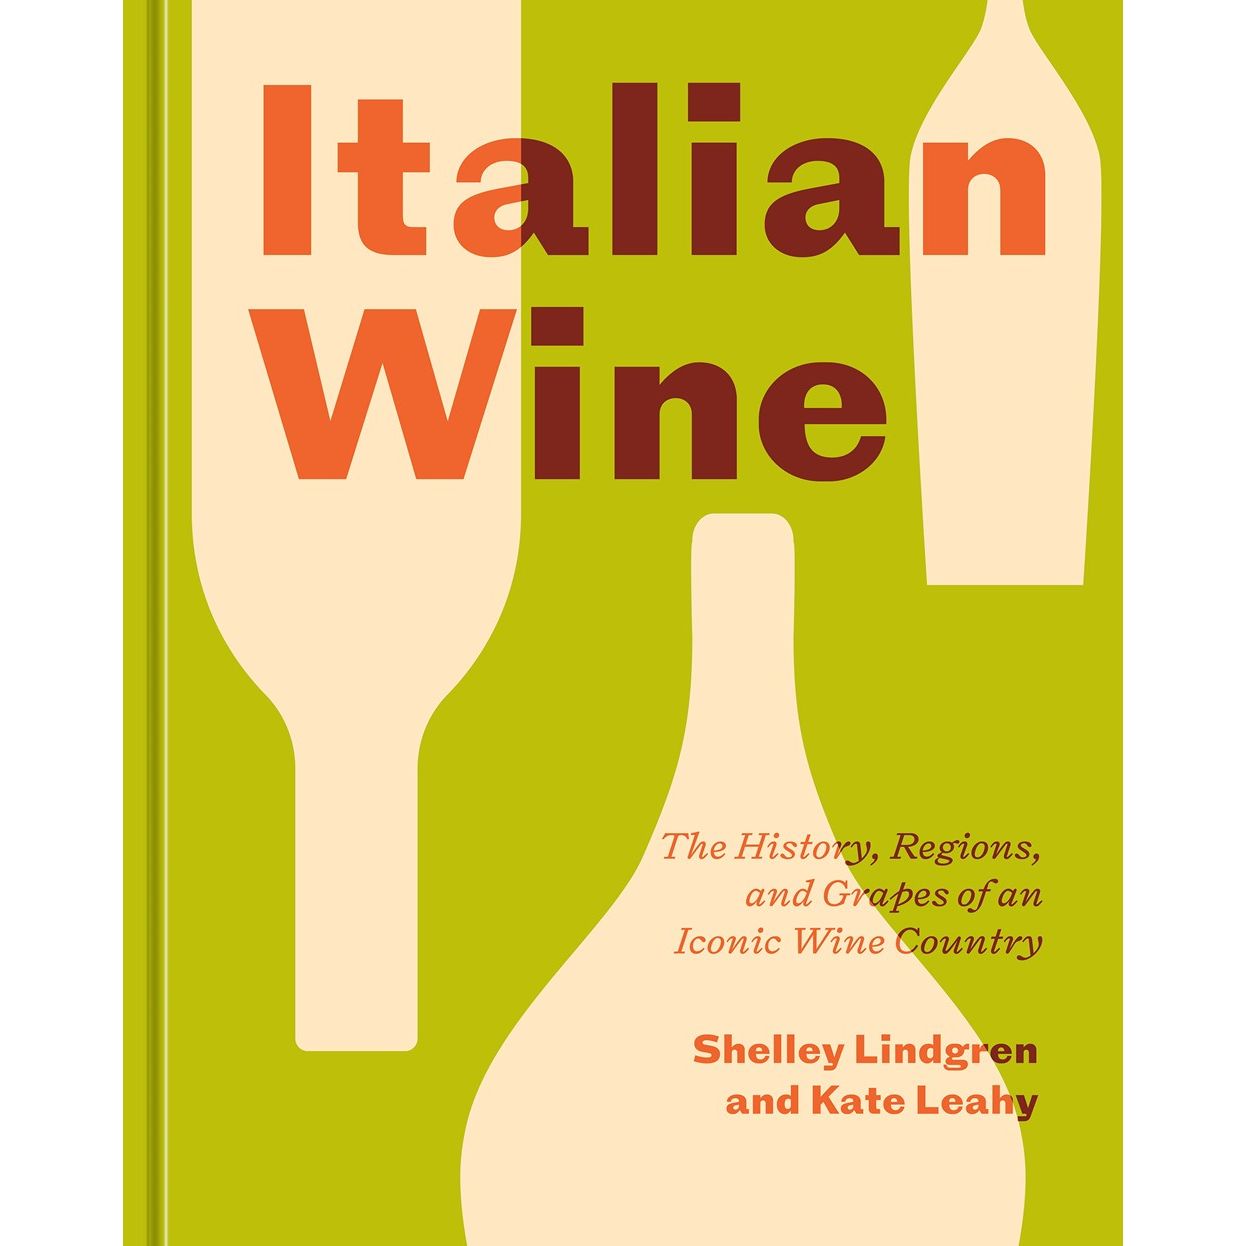 Italian Wine : The History, Regions, and Grapes of an Iconic Wine Country (Shelley Lindgren, Kate Leahy)